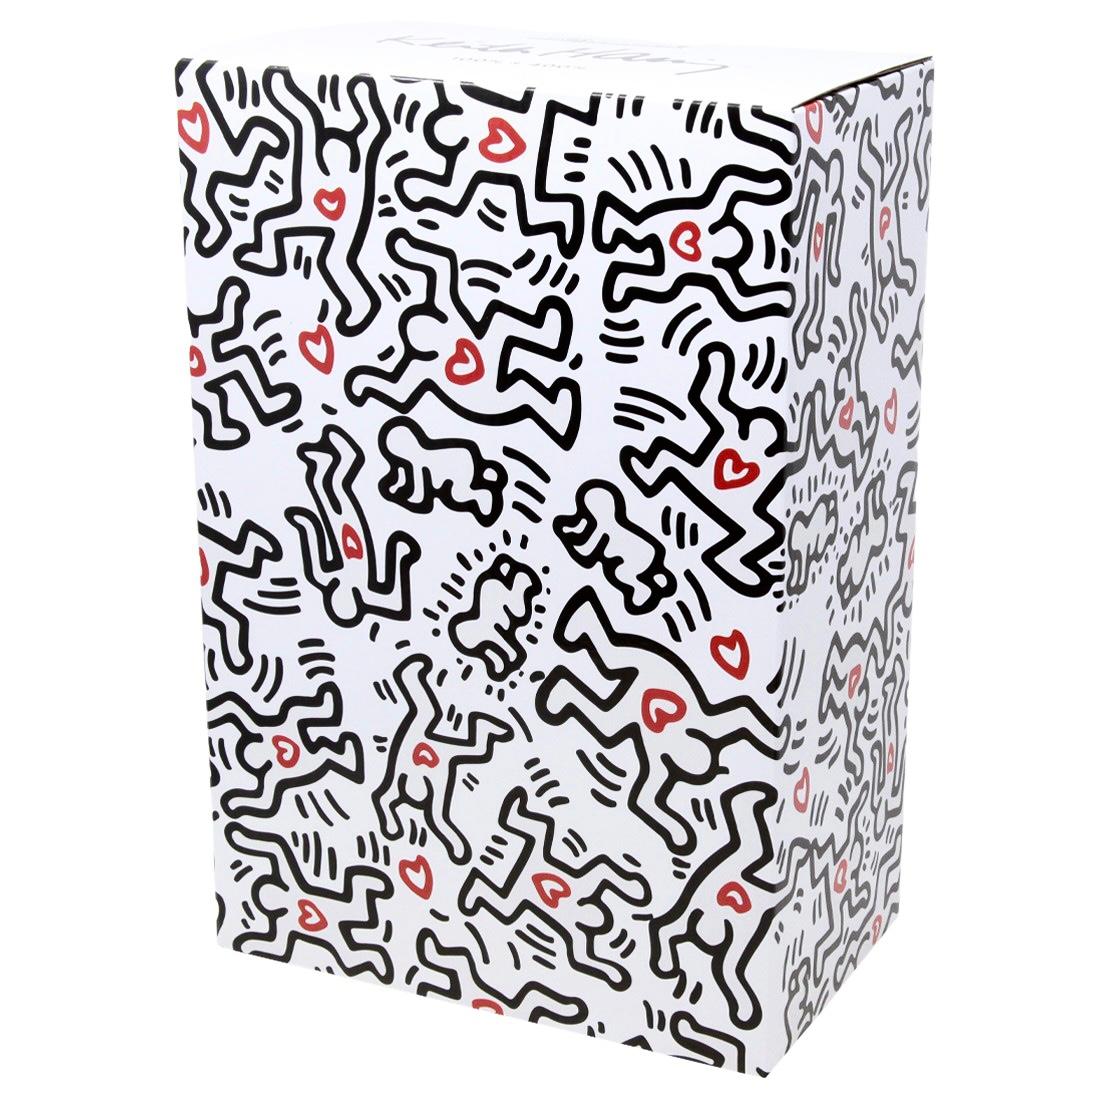 Keith Haring Bearbrick 400%  (Keith Haring BE@RBRICK)  - Street Art Print by (after) Keith Haring